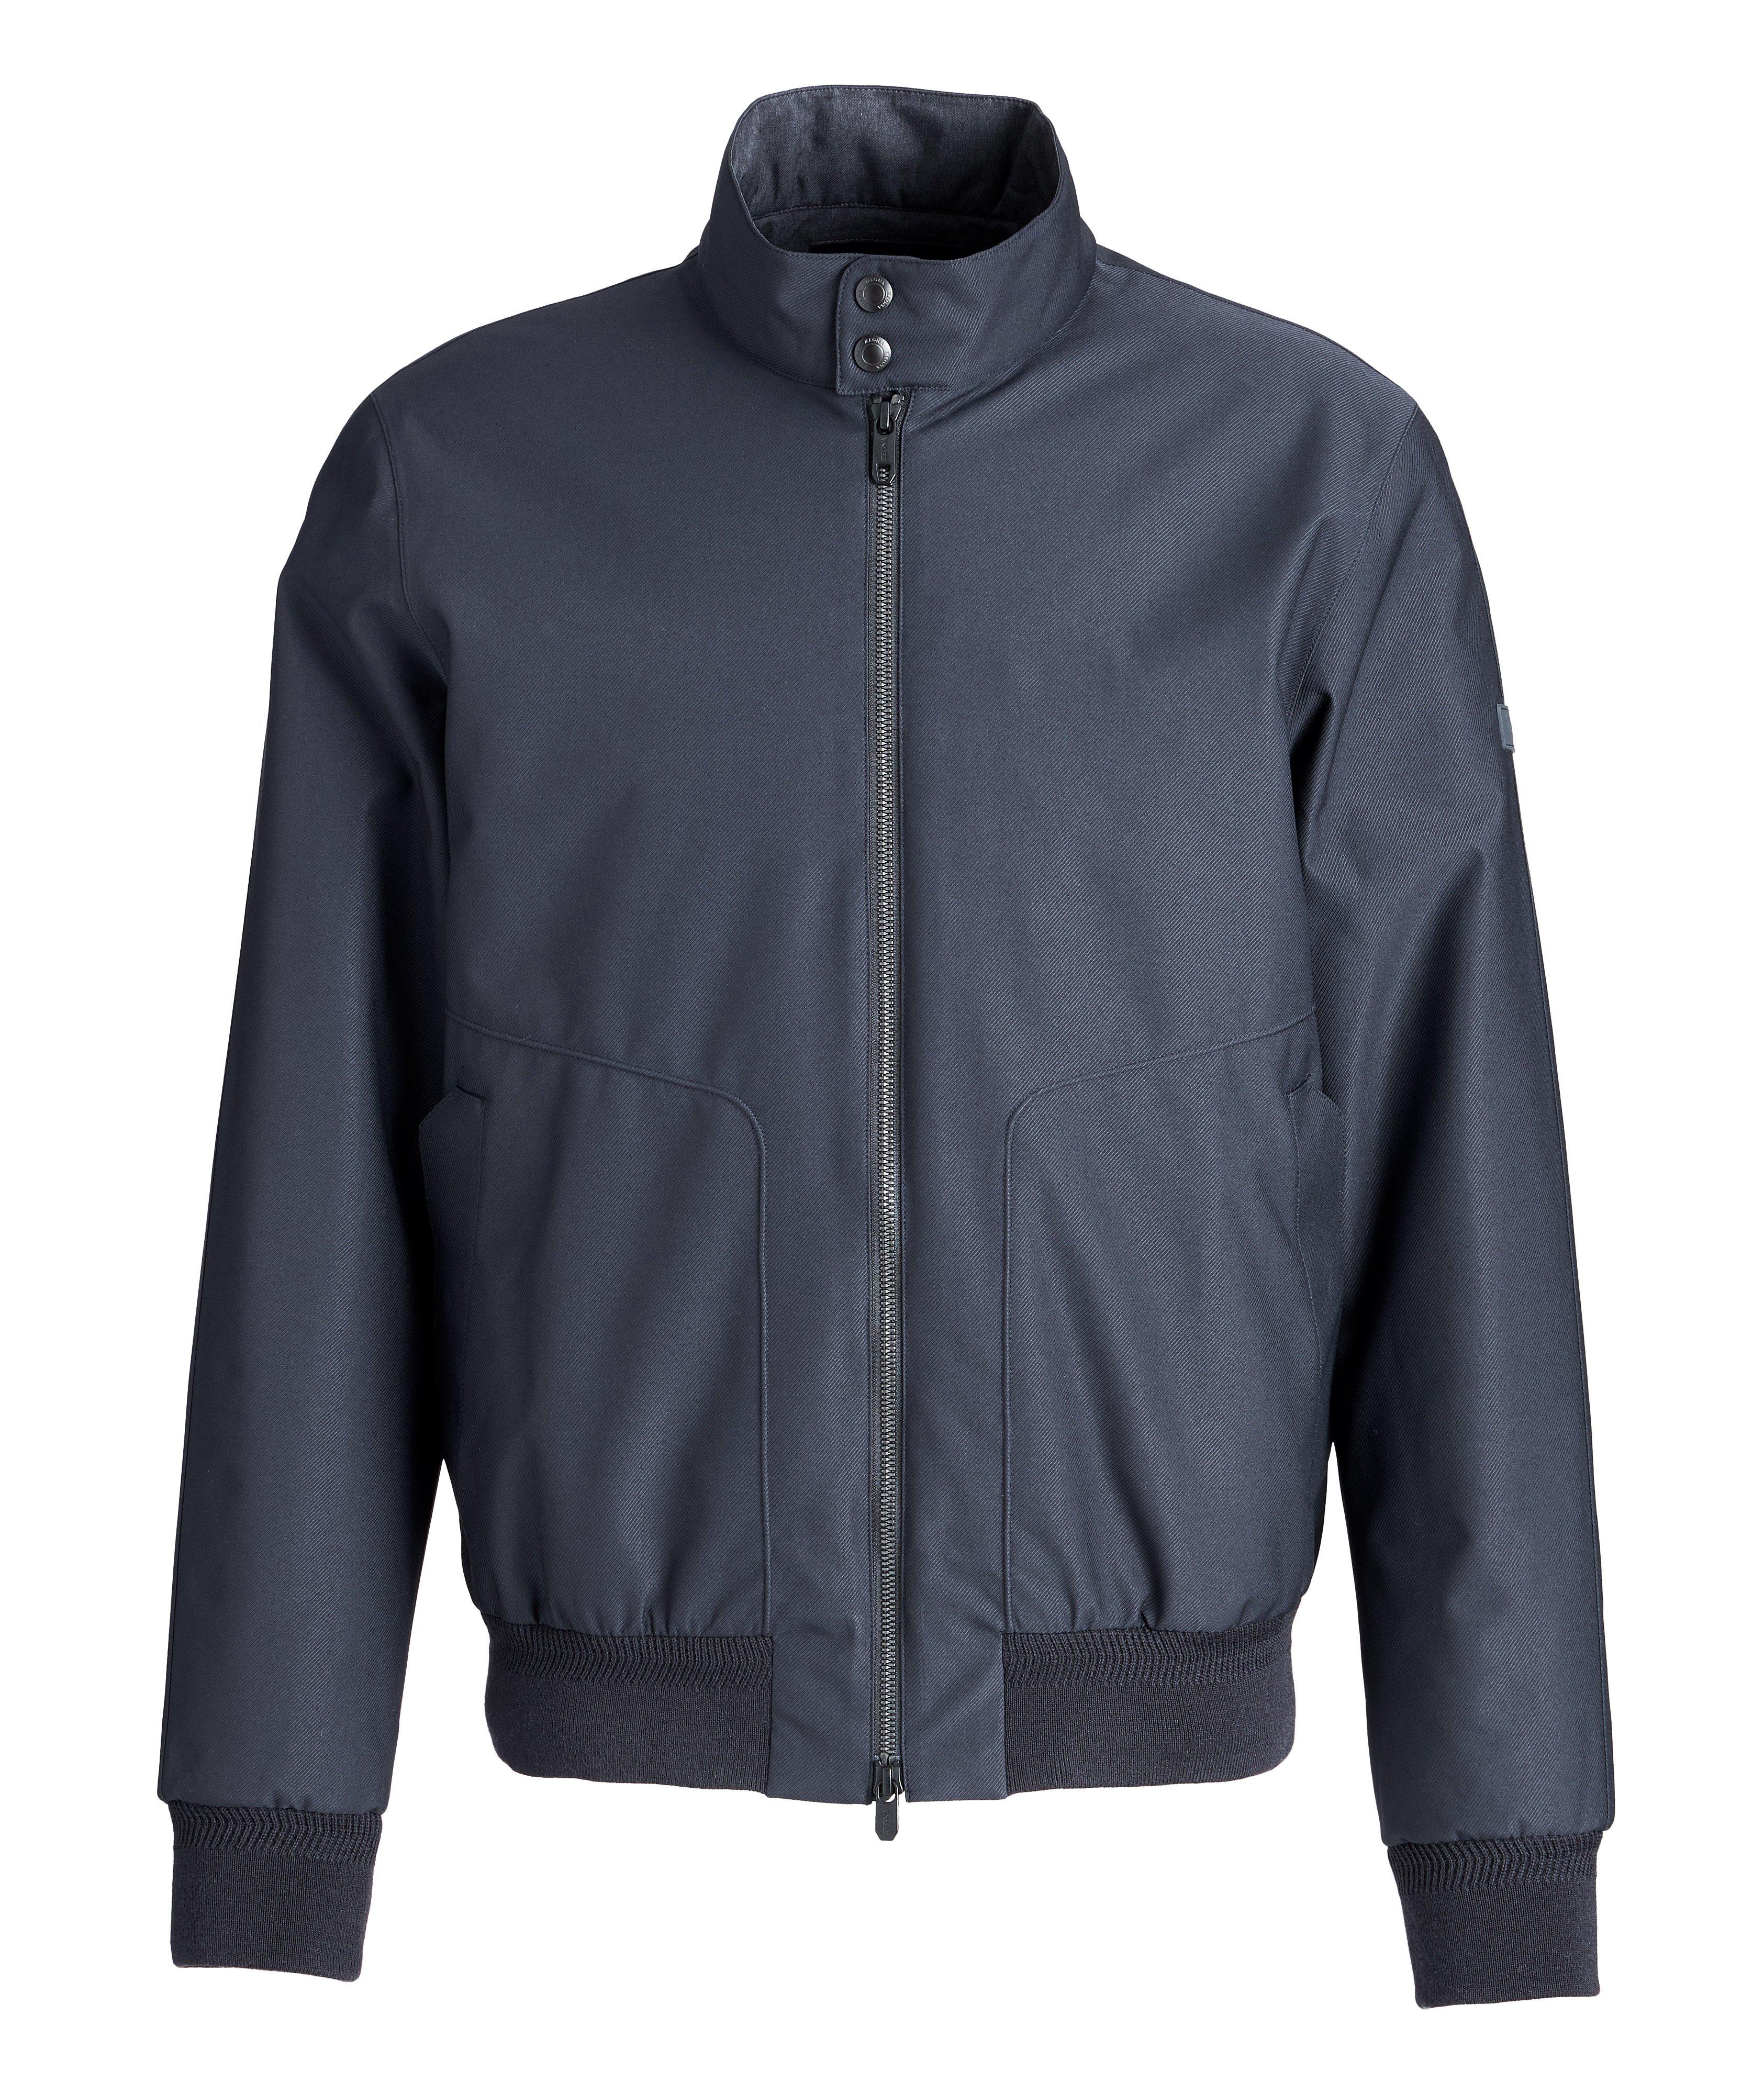 Microtene Water-Resistant Bomber Jacket image 0